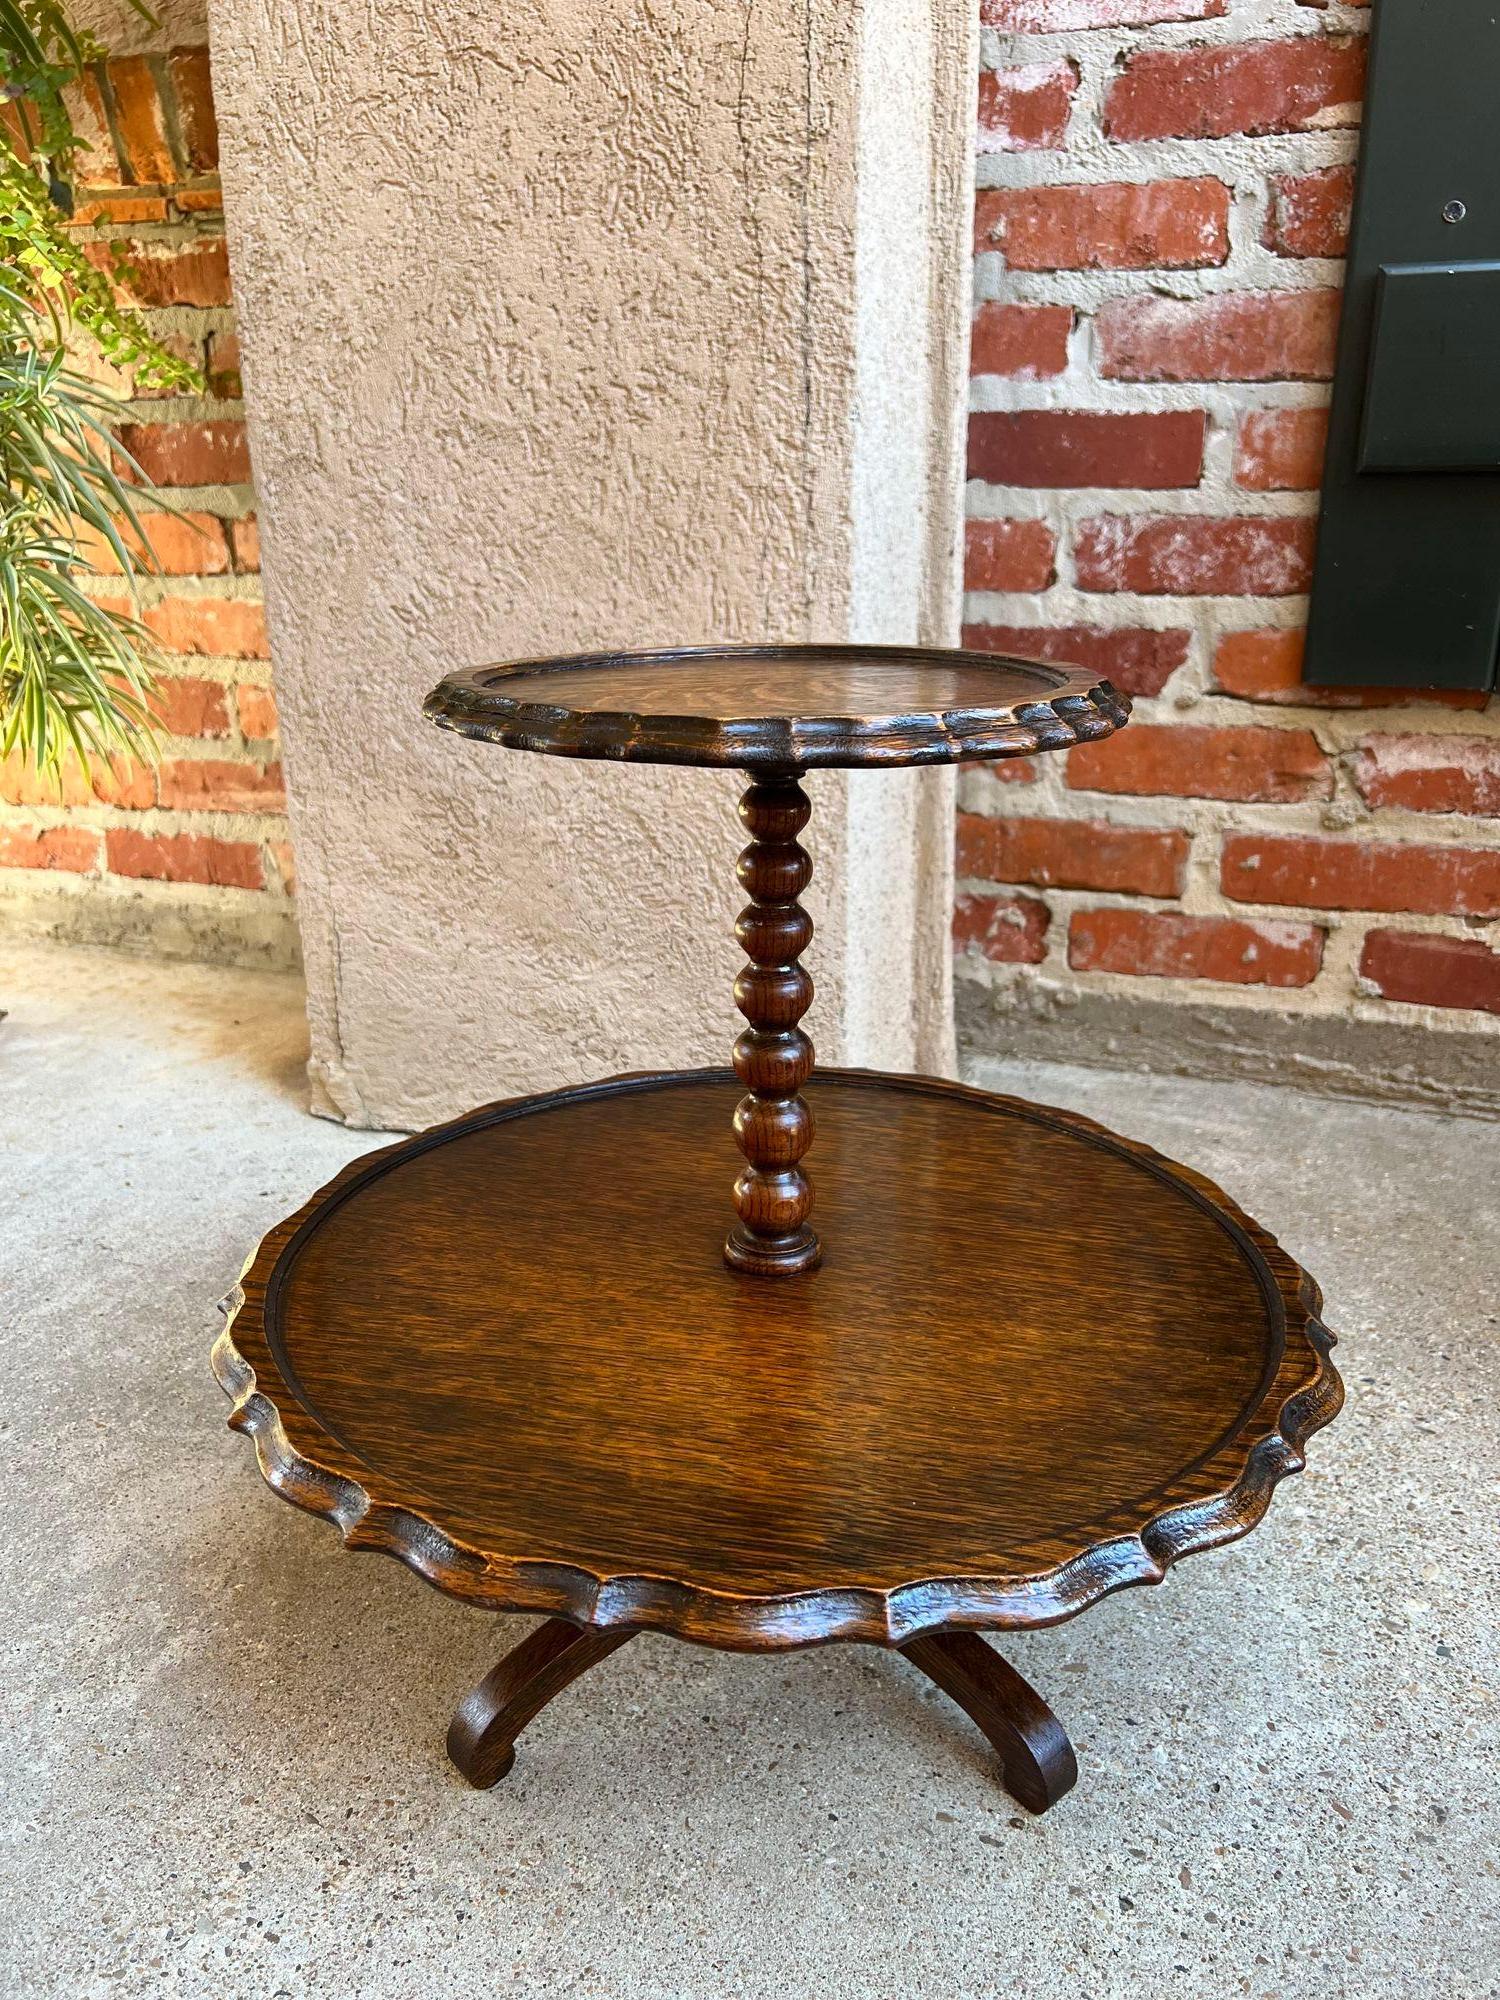 Antique English Revolving Dessert Server Cookie Muffin Display Tea Stand For Sale 8